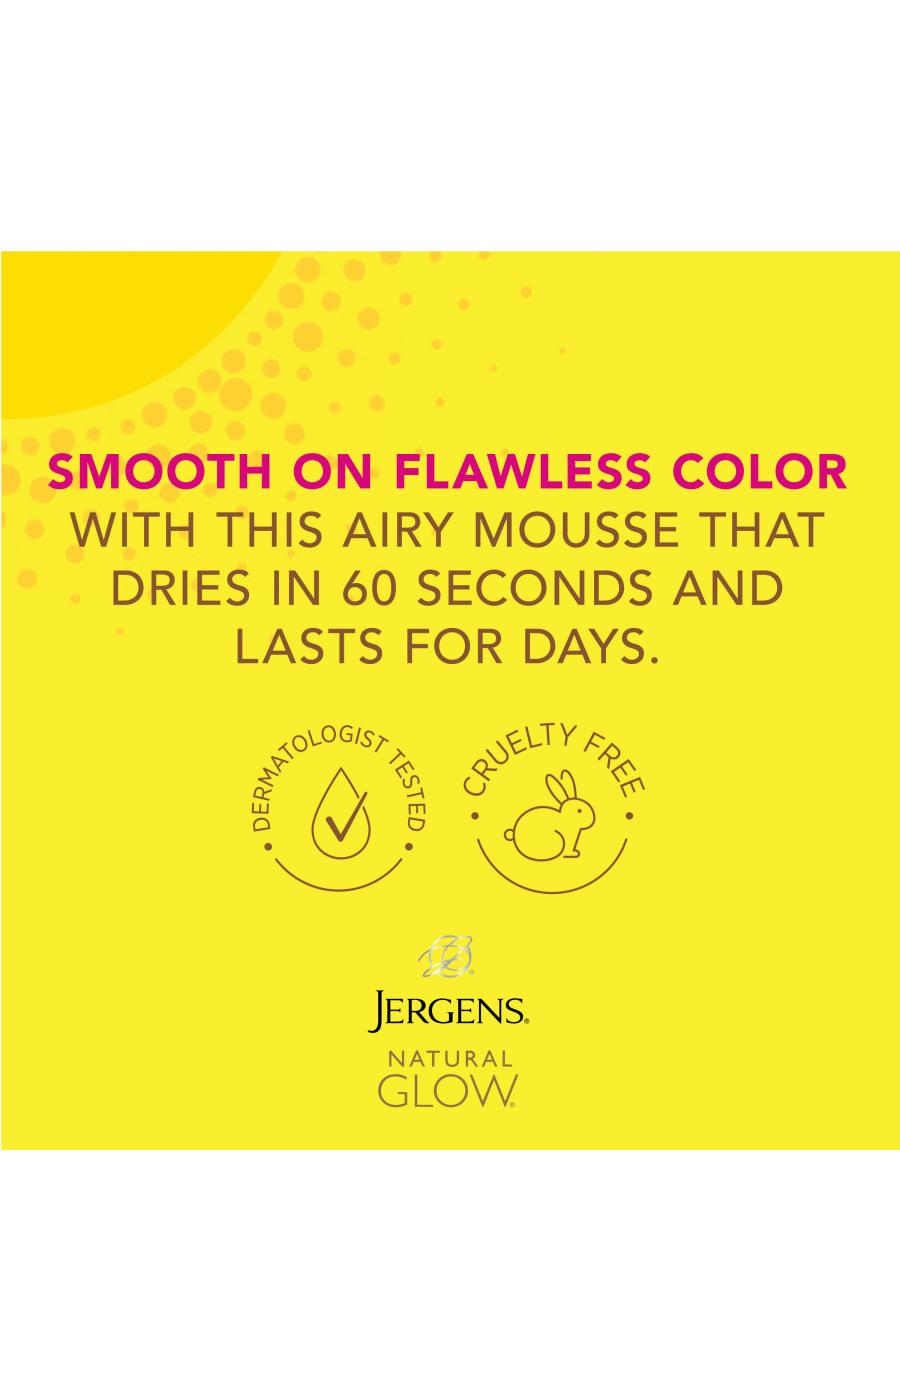 Jergens Natural Glow Instant Sun Light Bronze Tanning Mousse; image 6 of 10